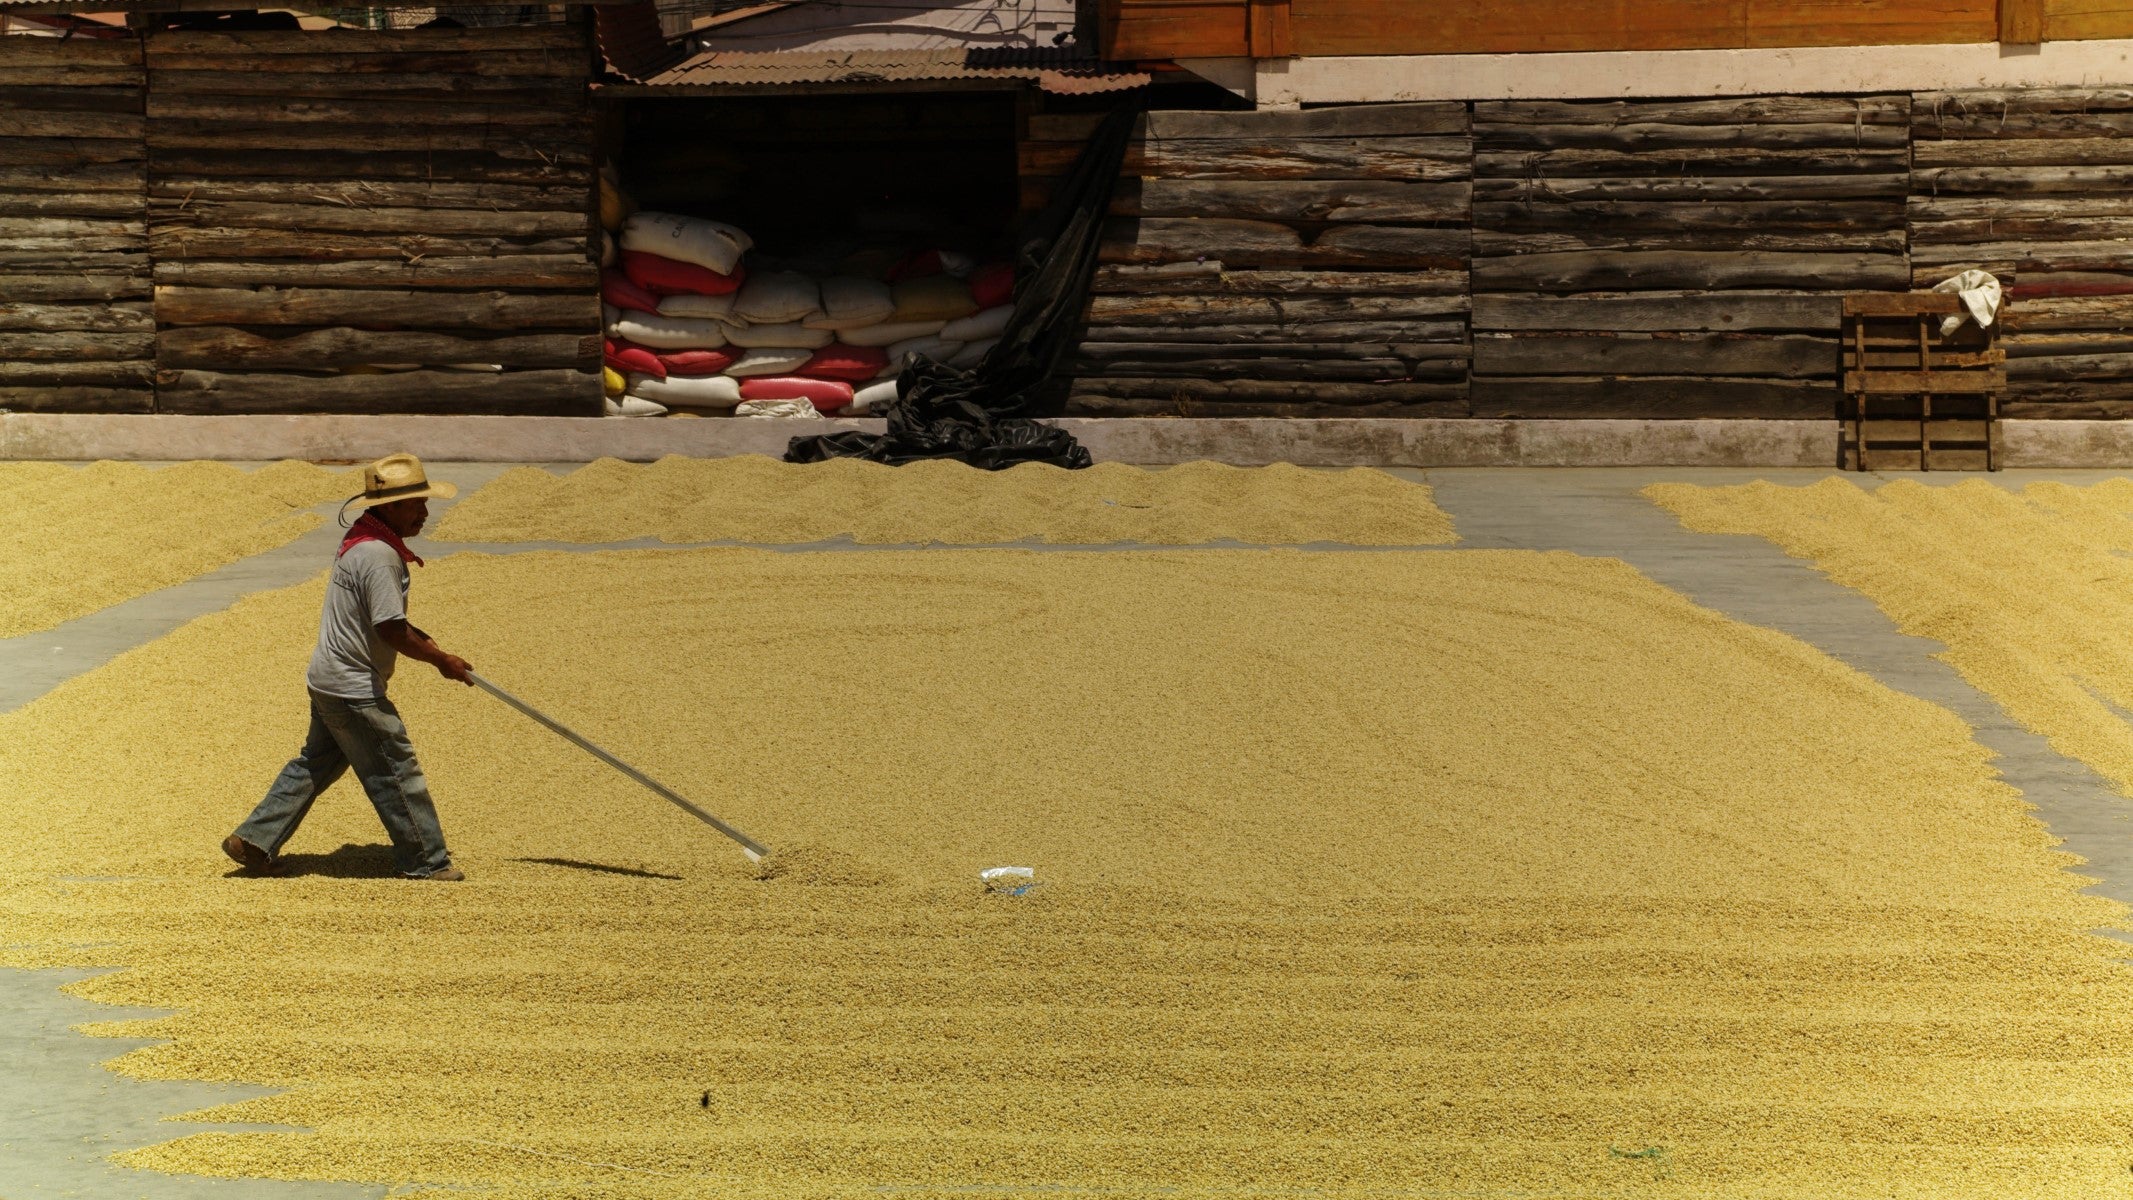 Long shot of a worker using a tool to spread speciality green coffee drying on a patio in the sun